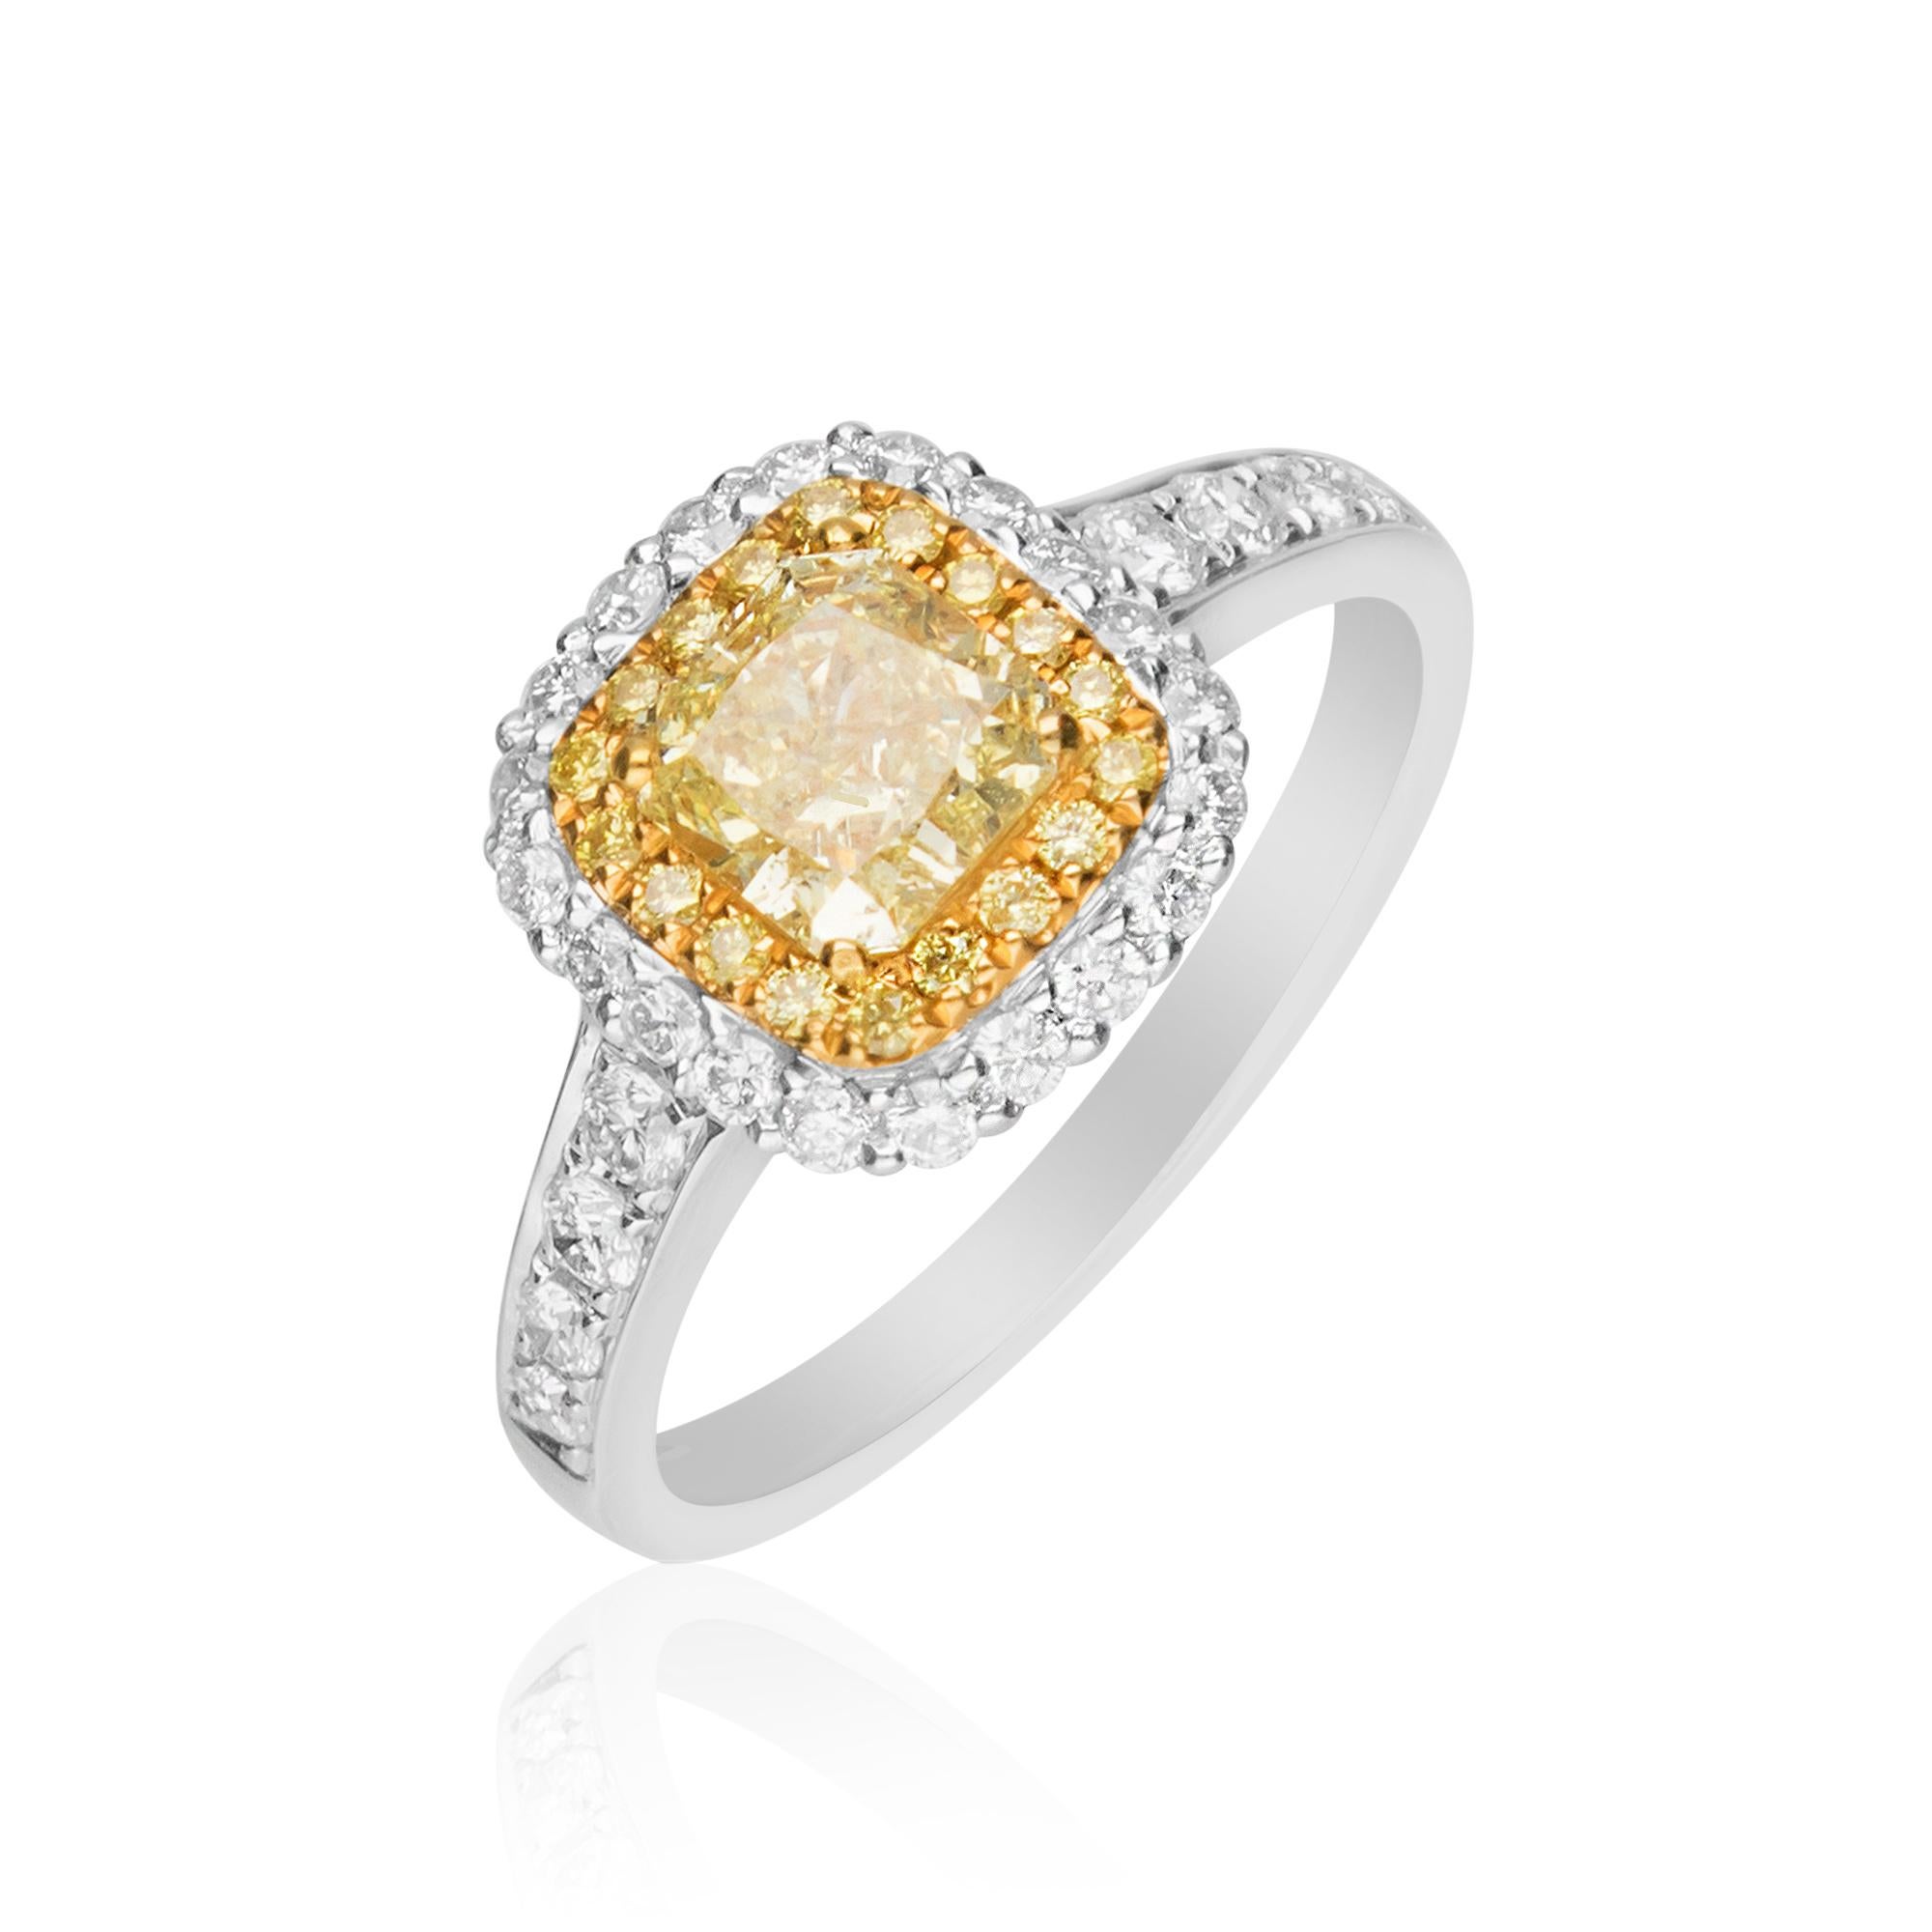 Featuring this beautiful Engagement ring, crafted in 18-karat Two Tone gold. It features a 1 Carat cushion cut Yellow Diamond surrounded by 18 yellow Diamonds 0.11 Carat & 28 Round Diamonds 0.47 Carat. 
This ring comes in size 7 and can be resized